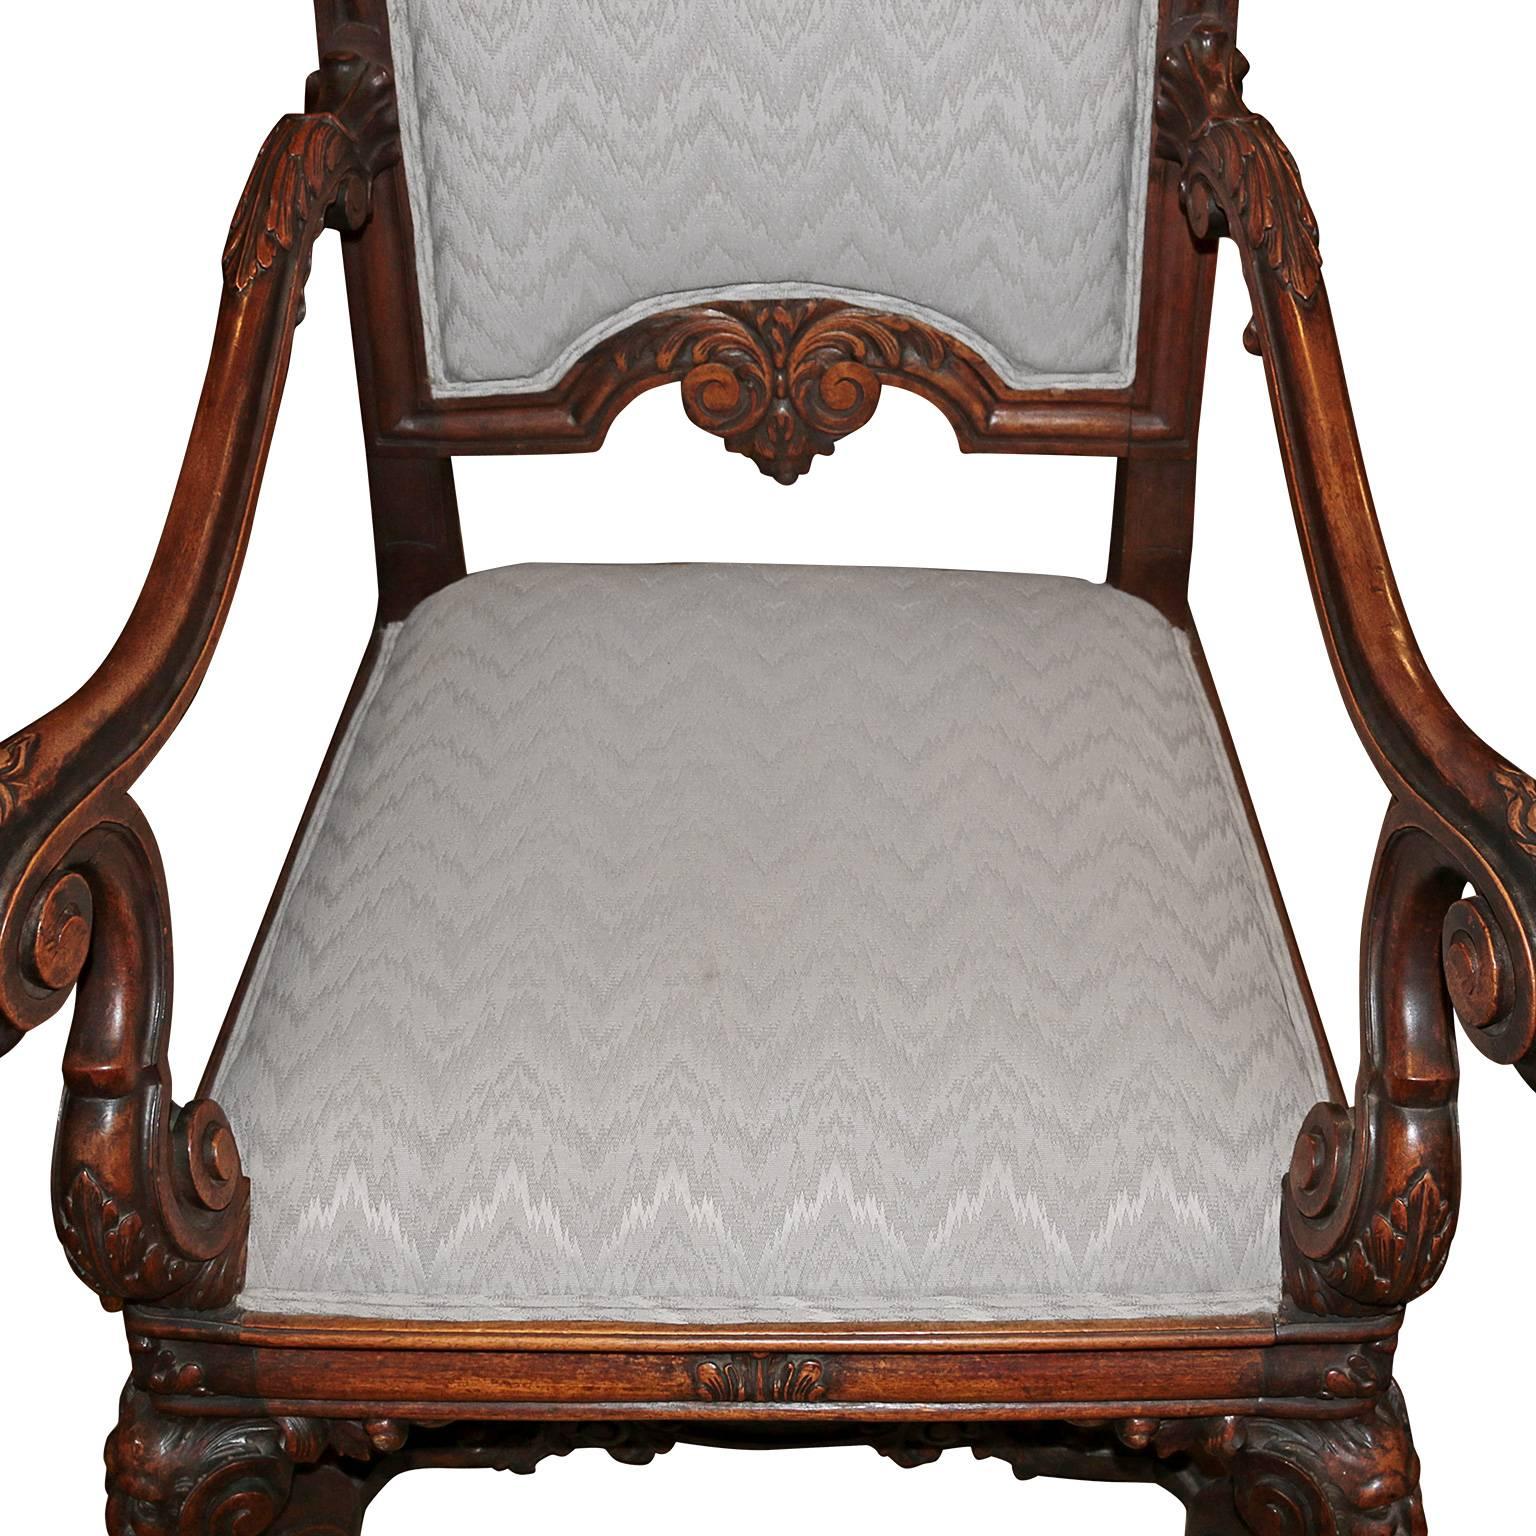 Spanish Hand-Carved Kings Chair with 24-karat Gold-Plated Bronze Emblem 1